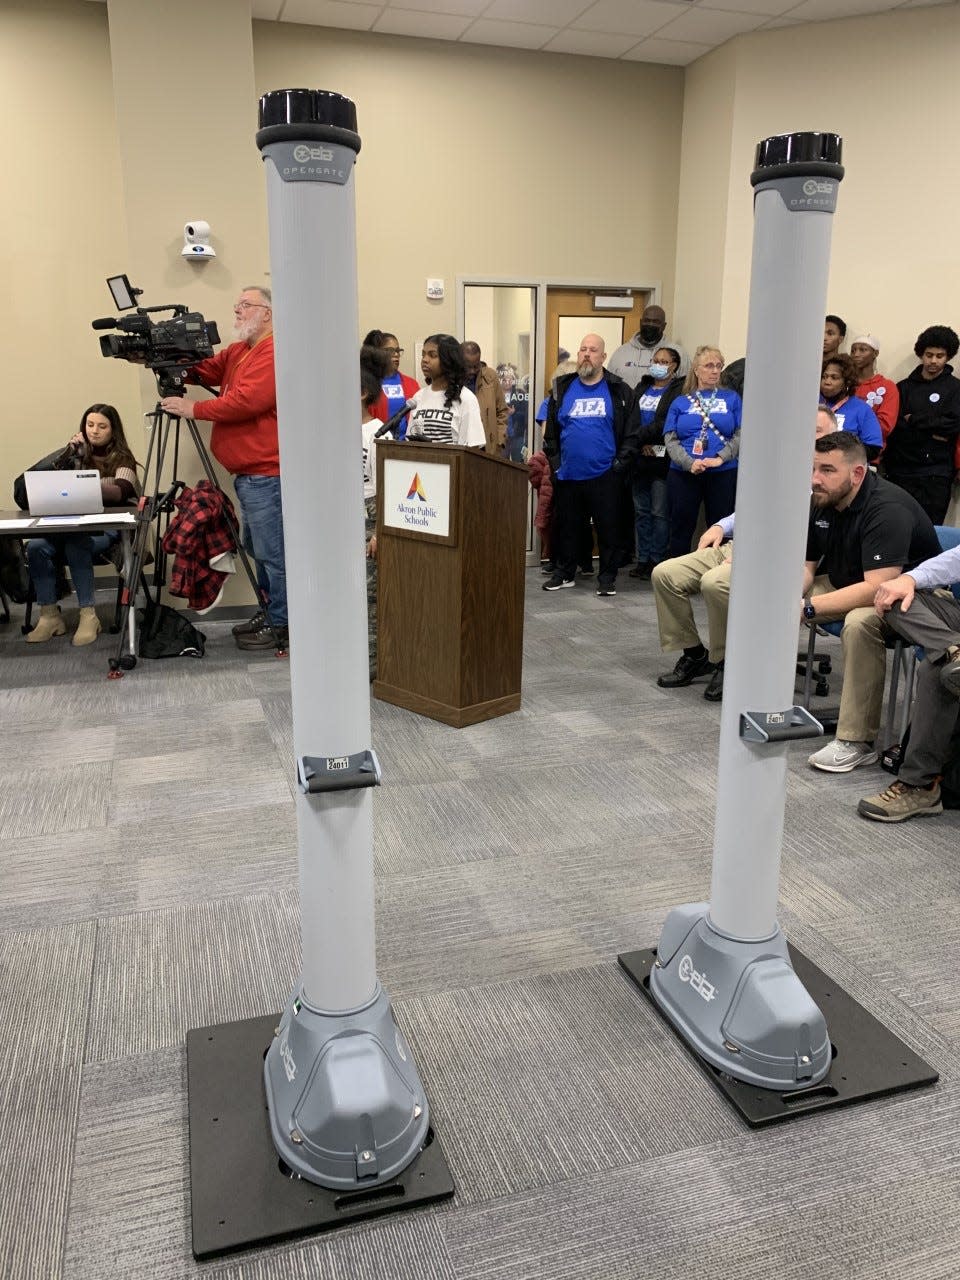 An example of the walk-through metal detectors the Akron Public Schools' administration wants to buy is on display Monday night at the school board meeting.